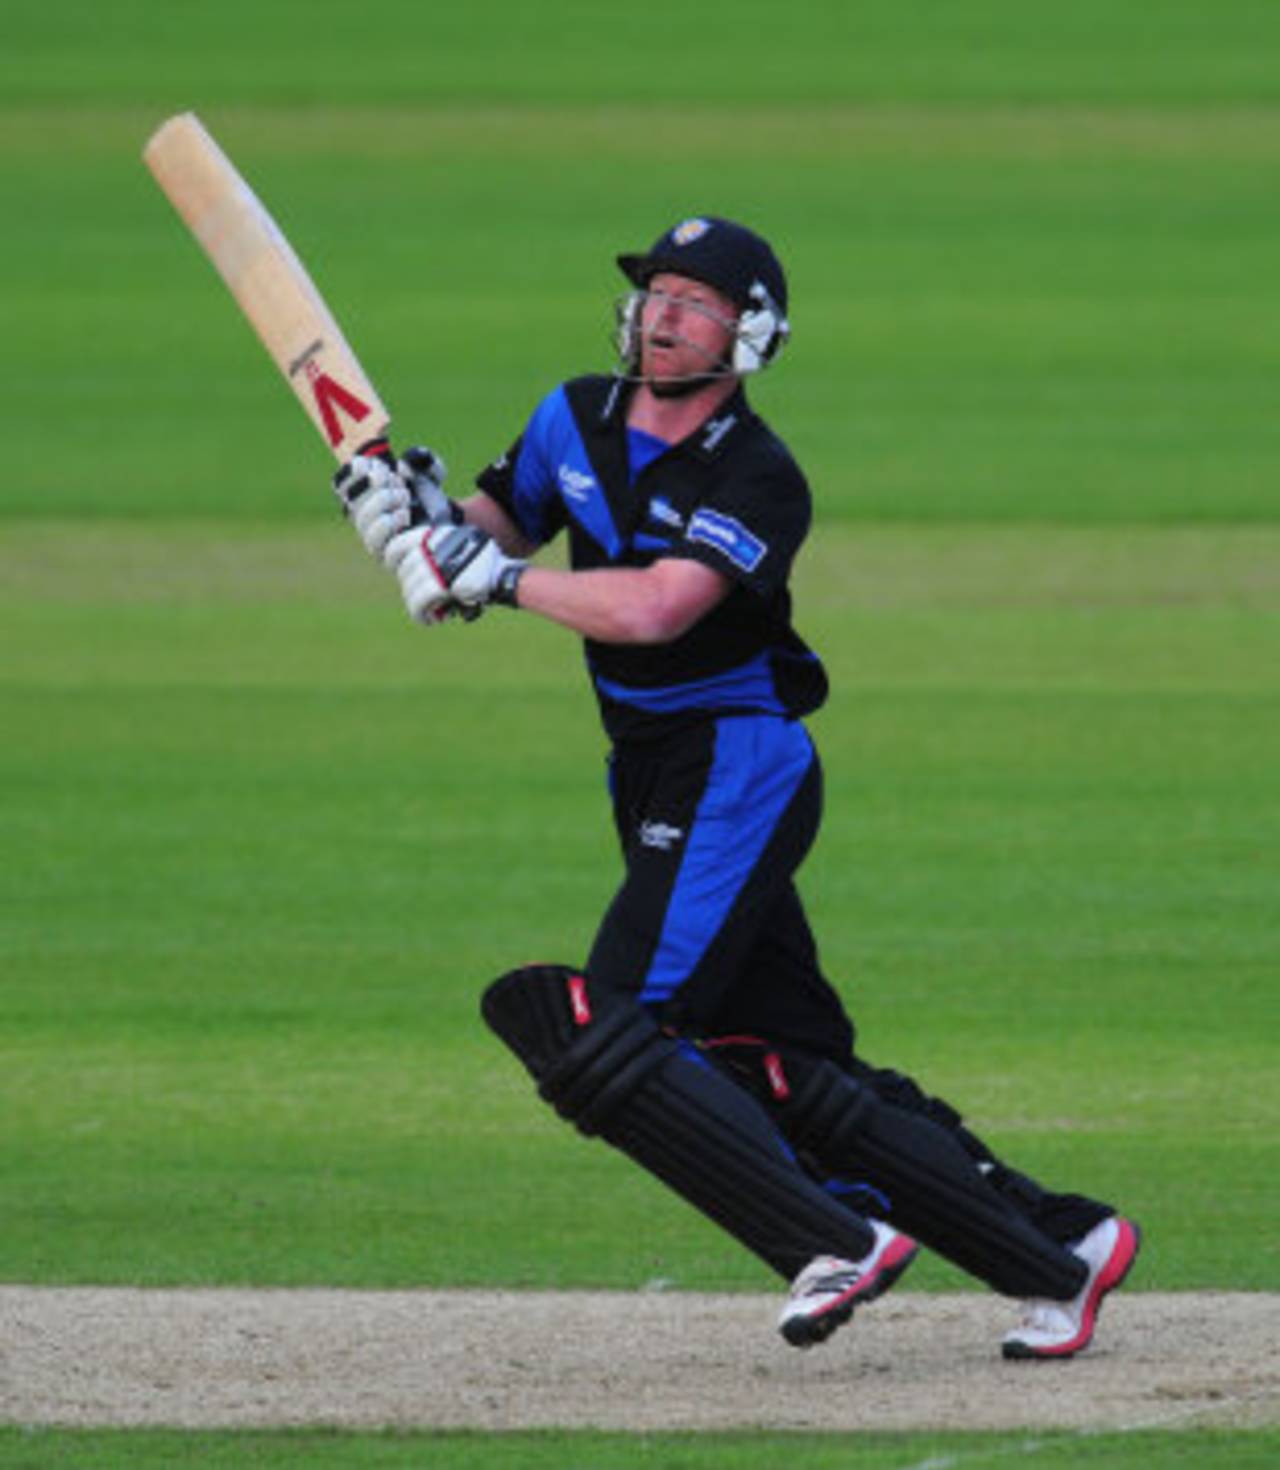 Paul Collingwood struggled to find his touch, Durham v Lancashire, FLt20 North Group, Chester-le-Street, June 28, 2013